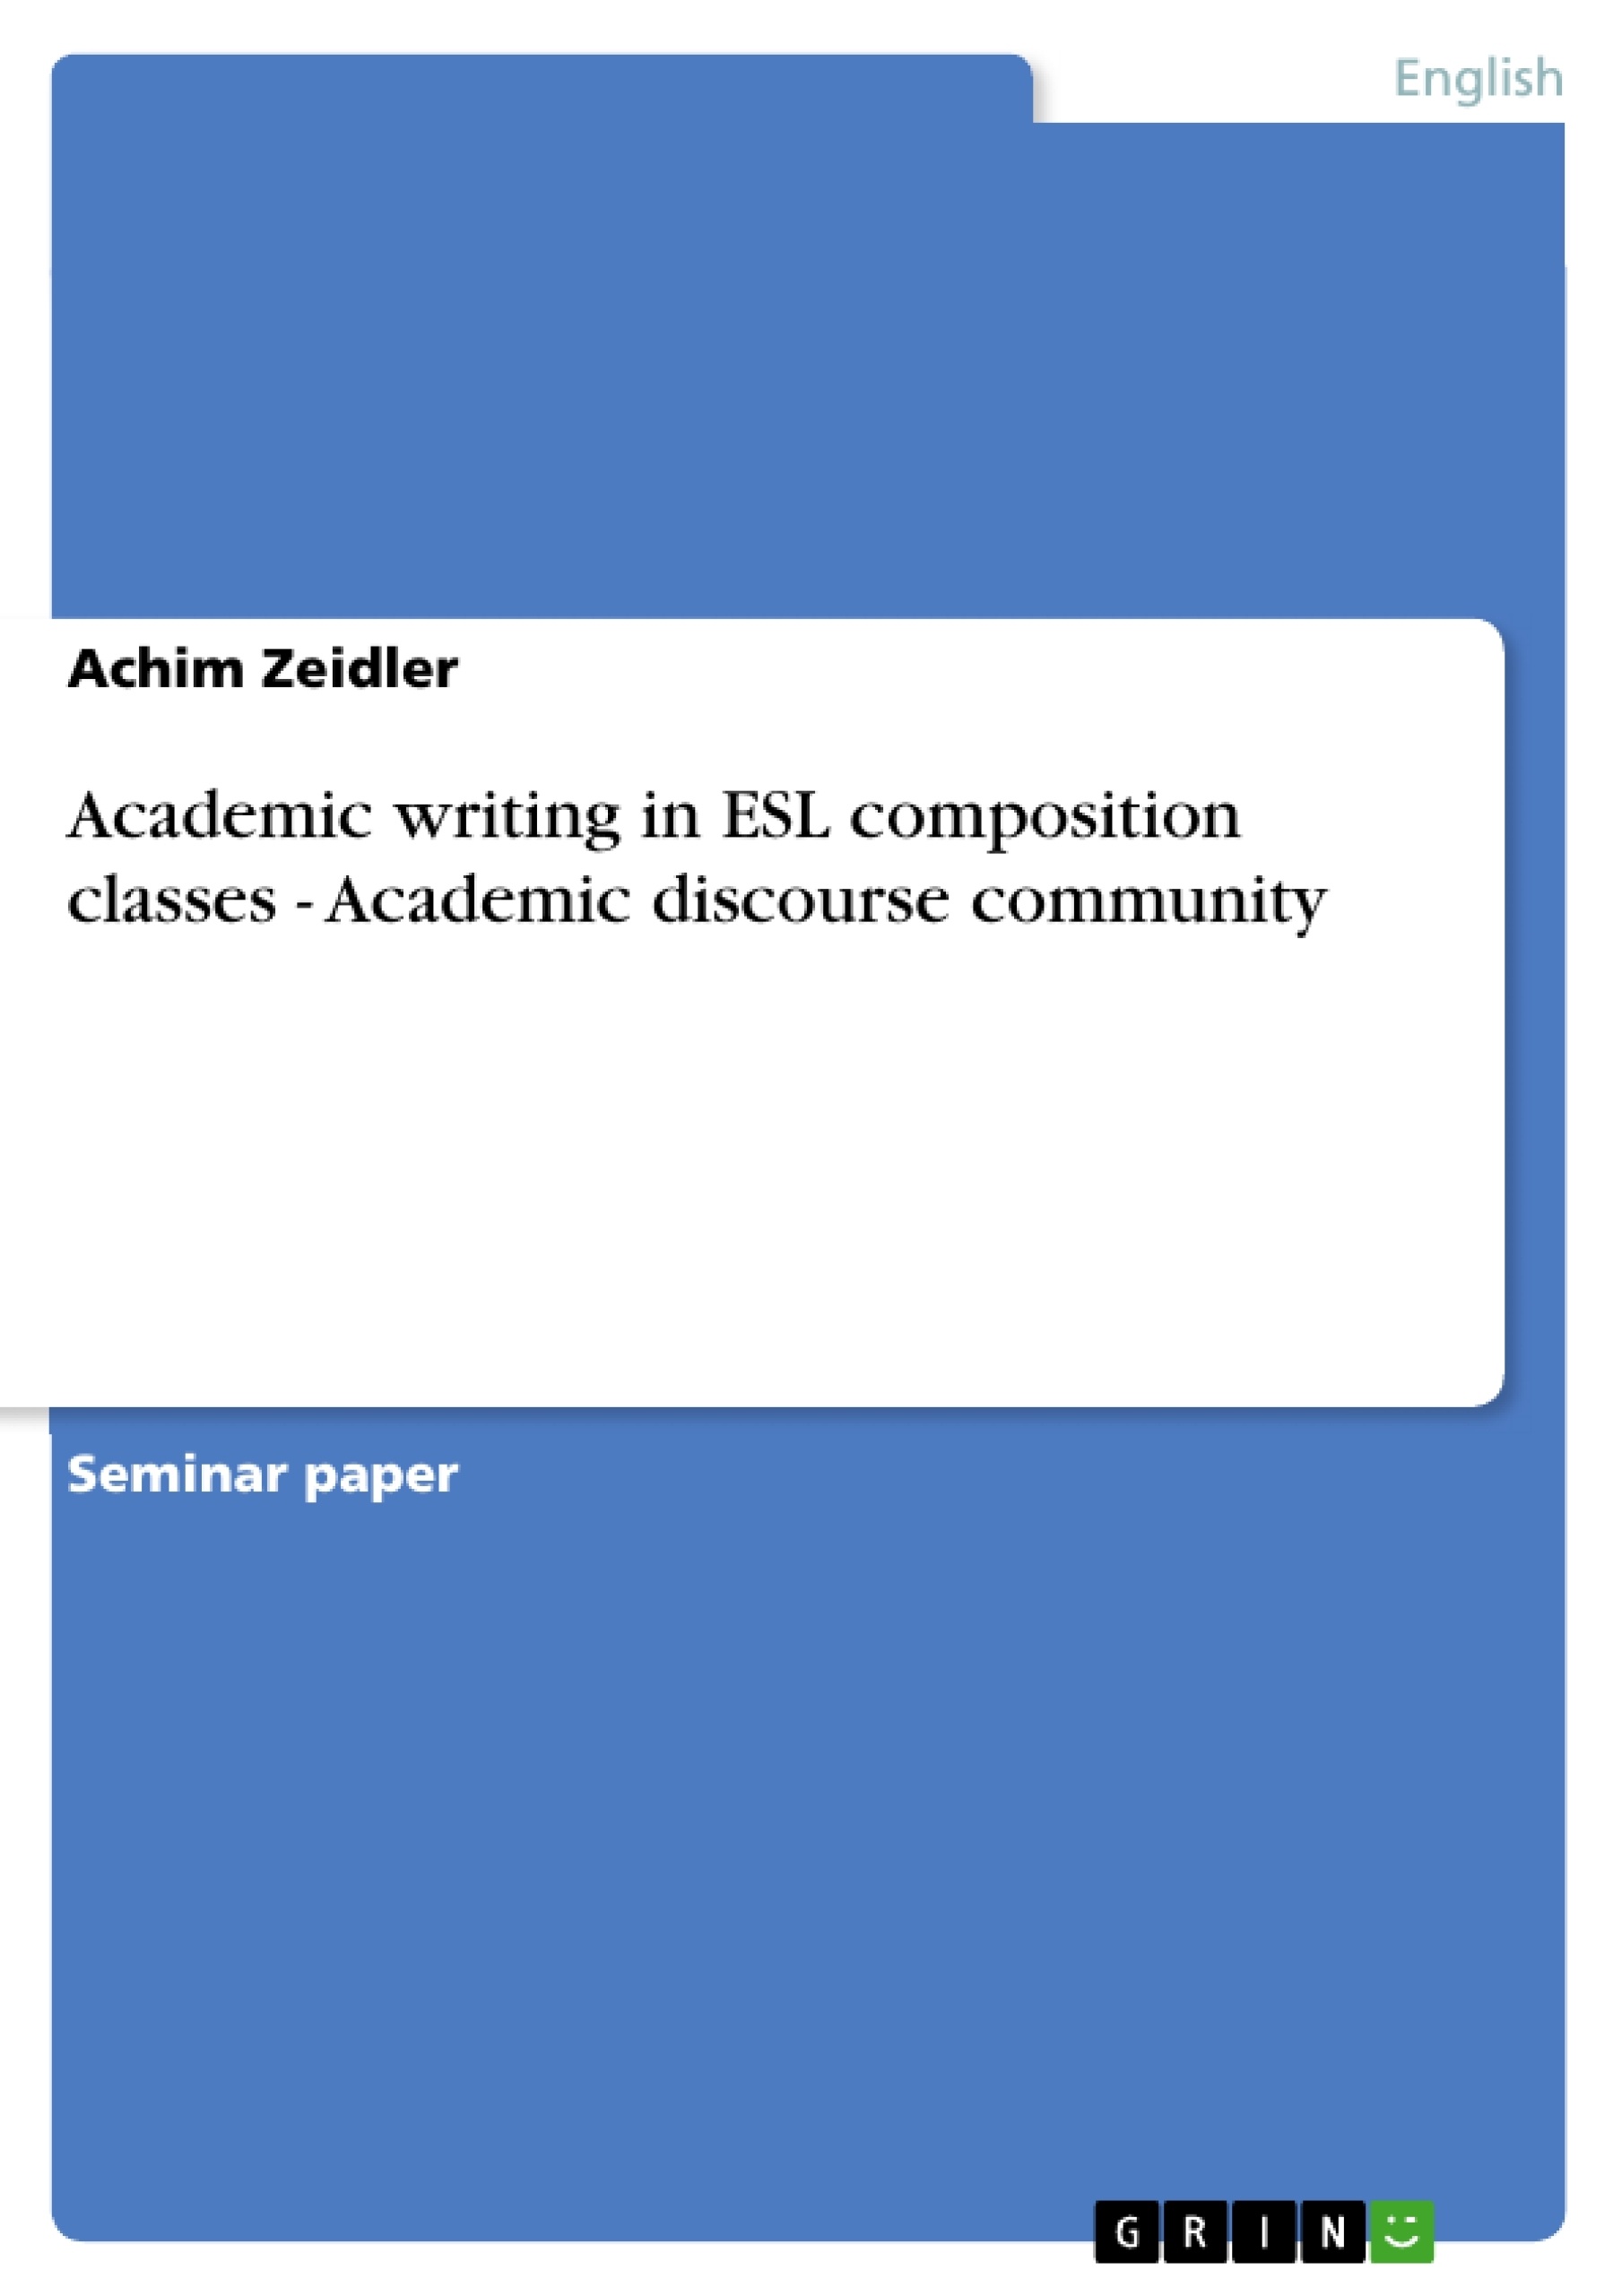 Academic writing in ESL composition classes - Academic discourse